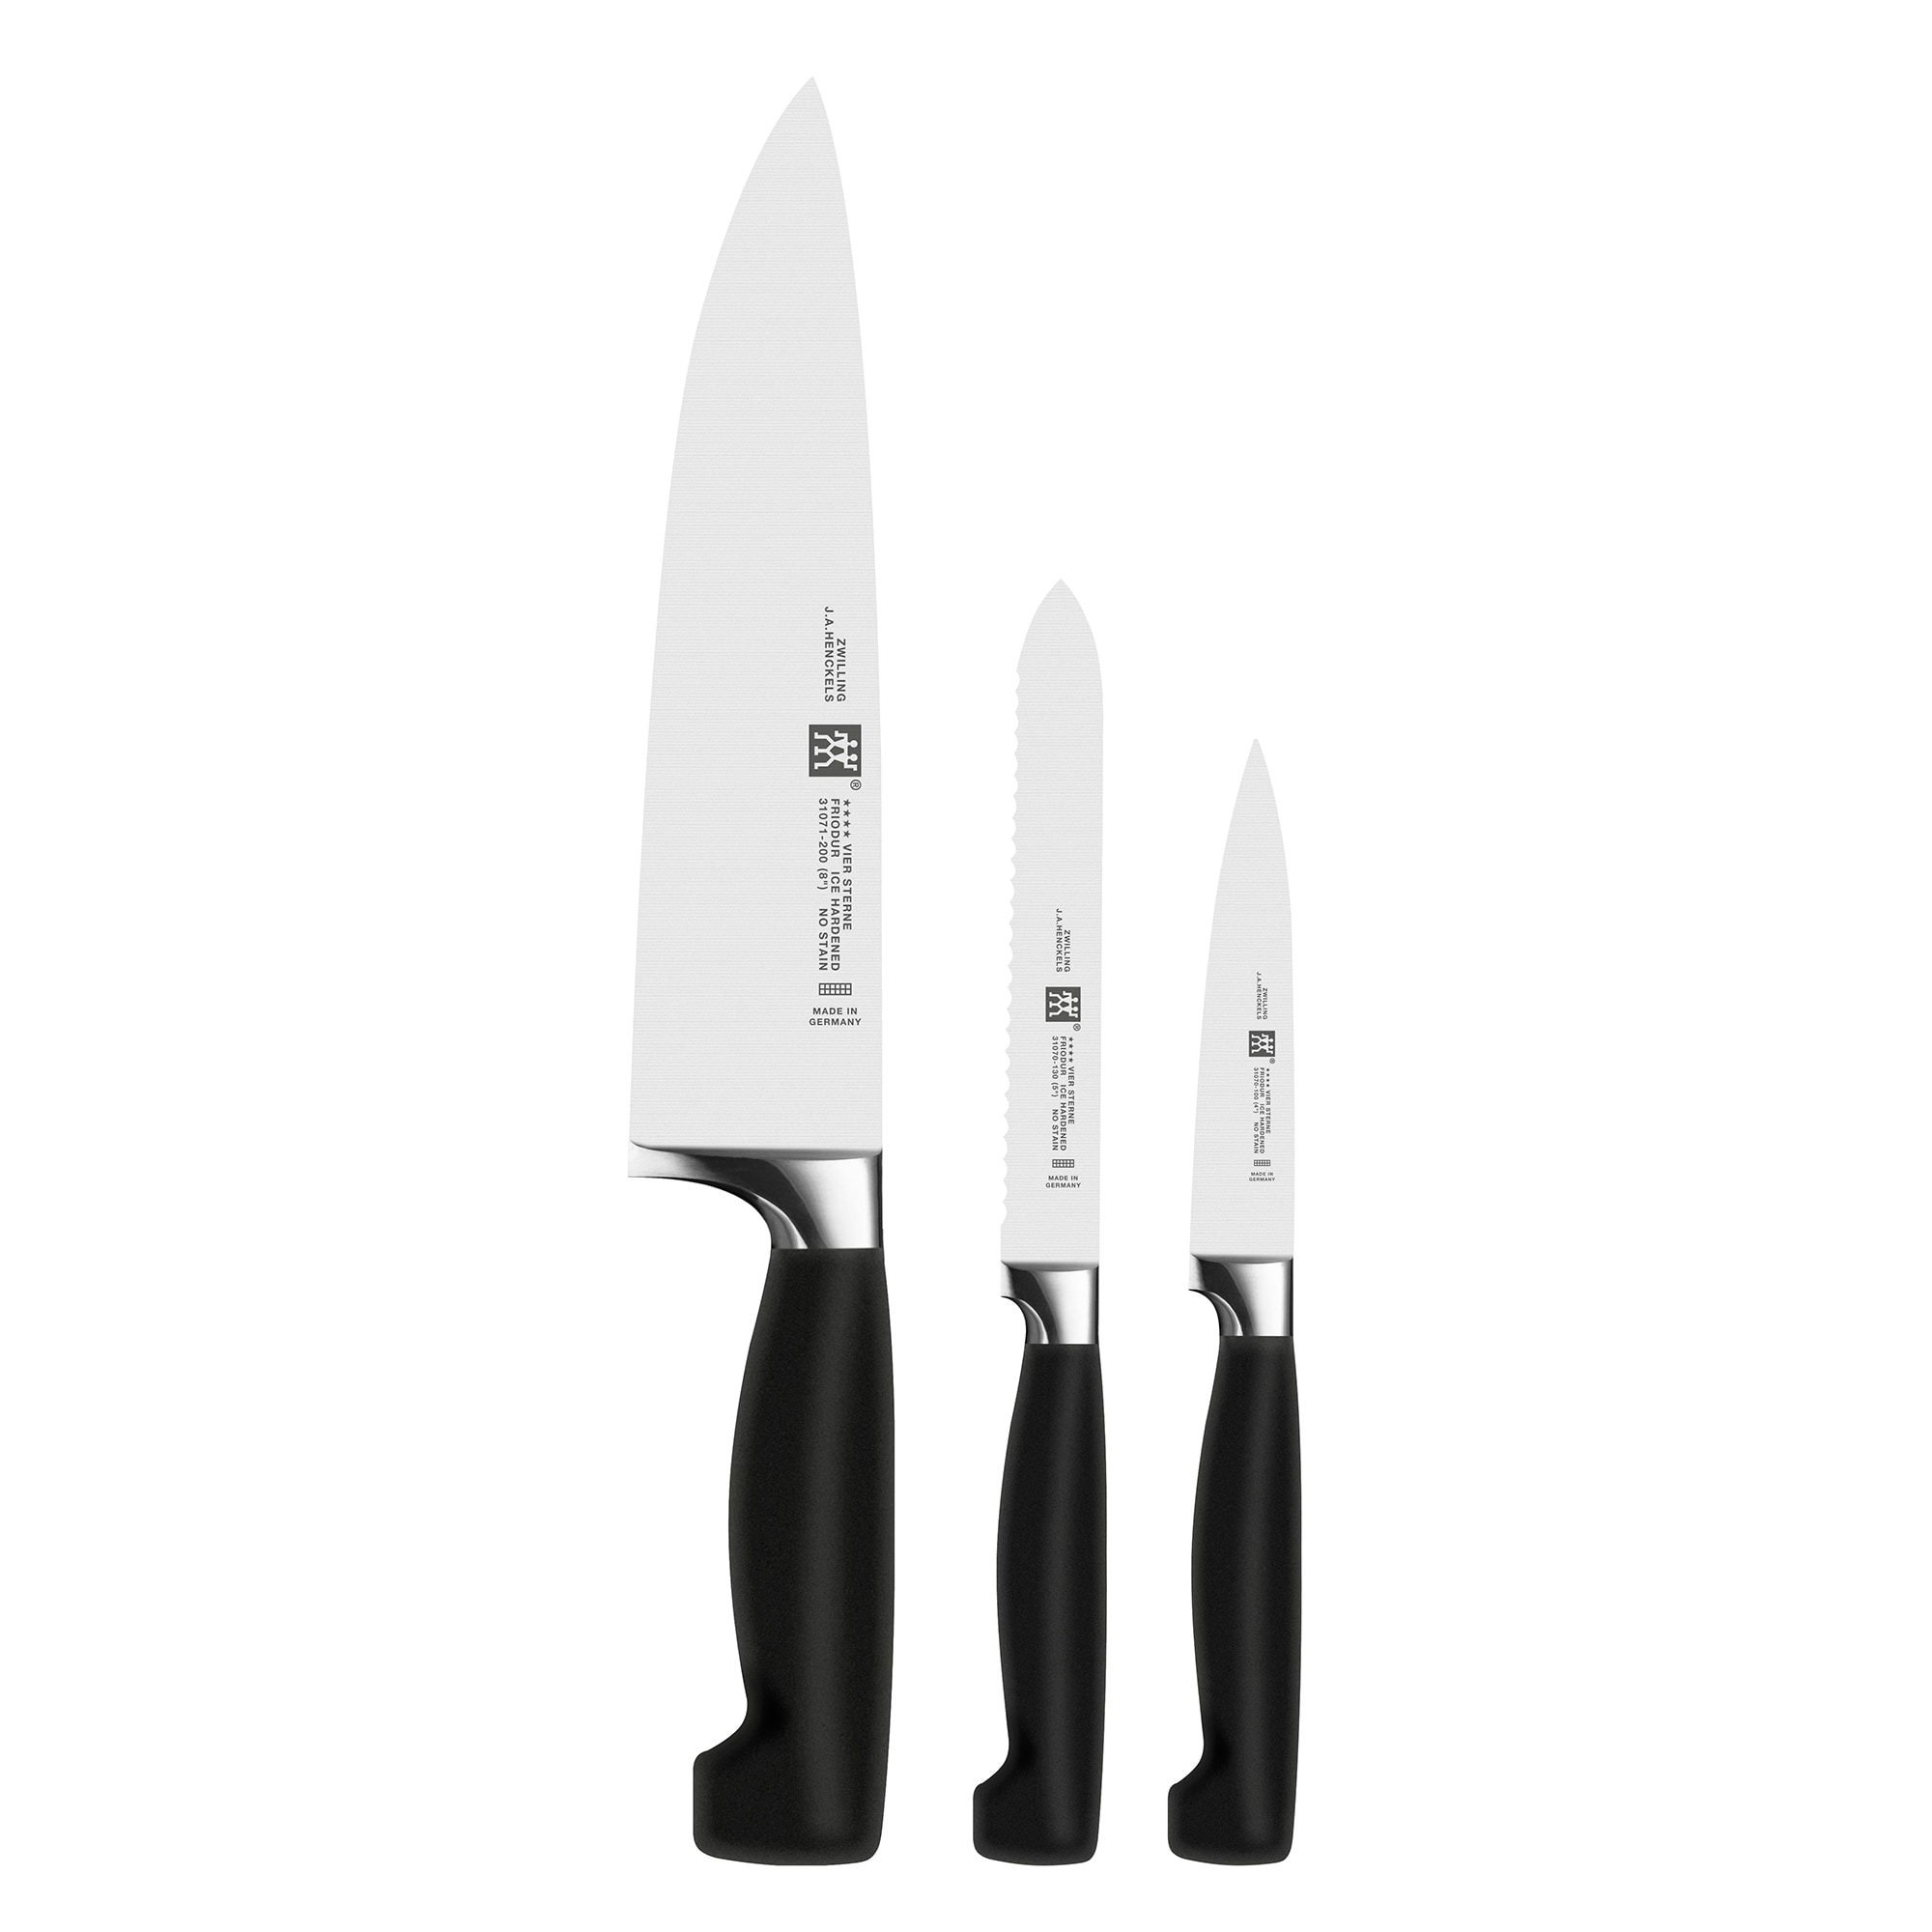 NEW Zwilling FOUR STAR Paring Knife 4 Inch High Carbon Stainless Steel  31070-100